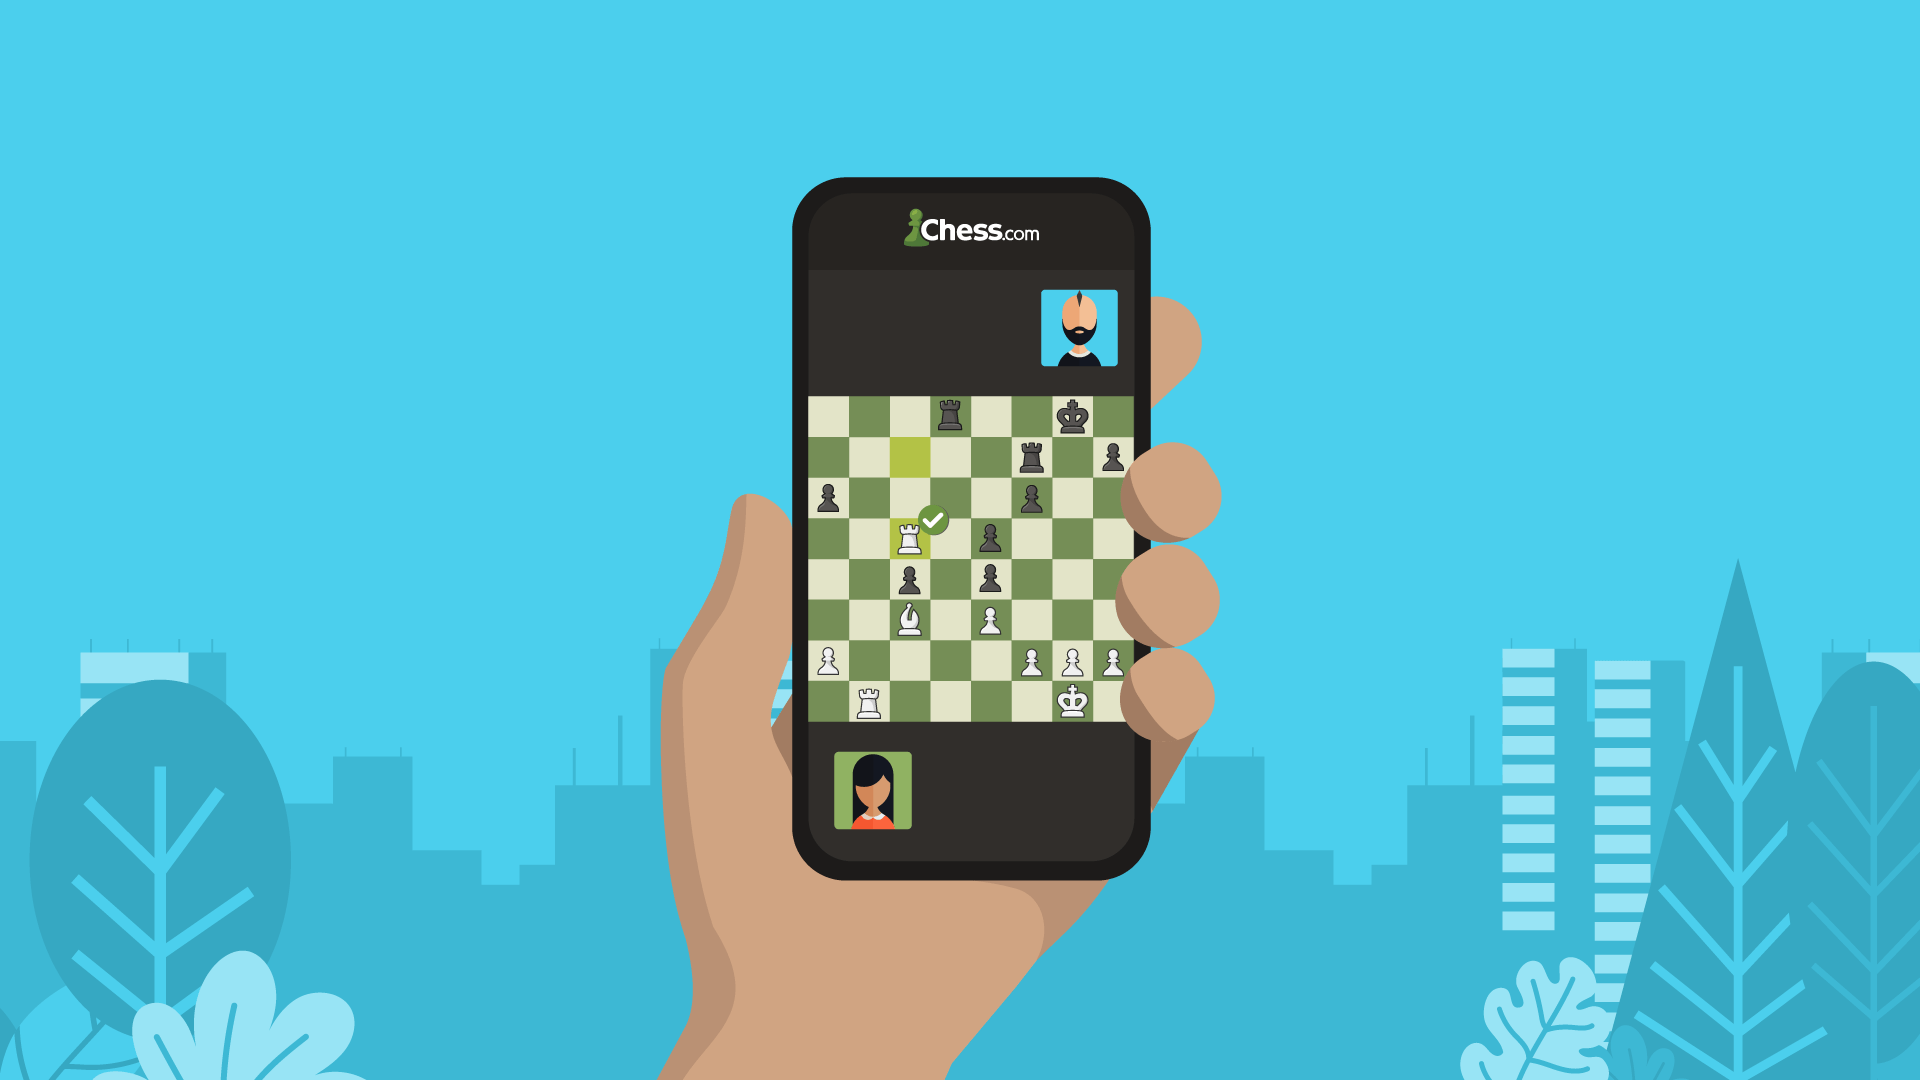 Chess Online: Board Games 3D - Offline Classic Chess 3D - Chess Maker : Play  With Friends - Multiplayer Chess Game - Online Multiplayer Chess - Offline  Multiplayer Chess - Real Chess - Microsoft Apps